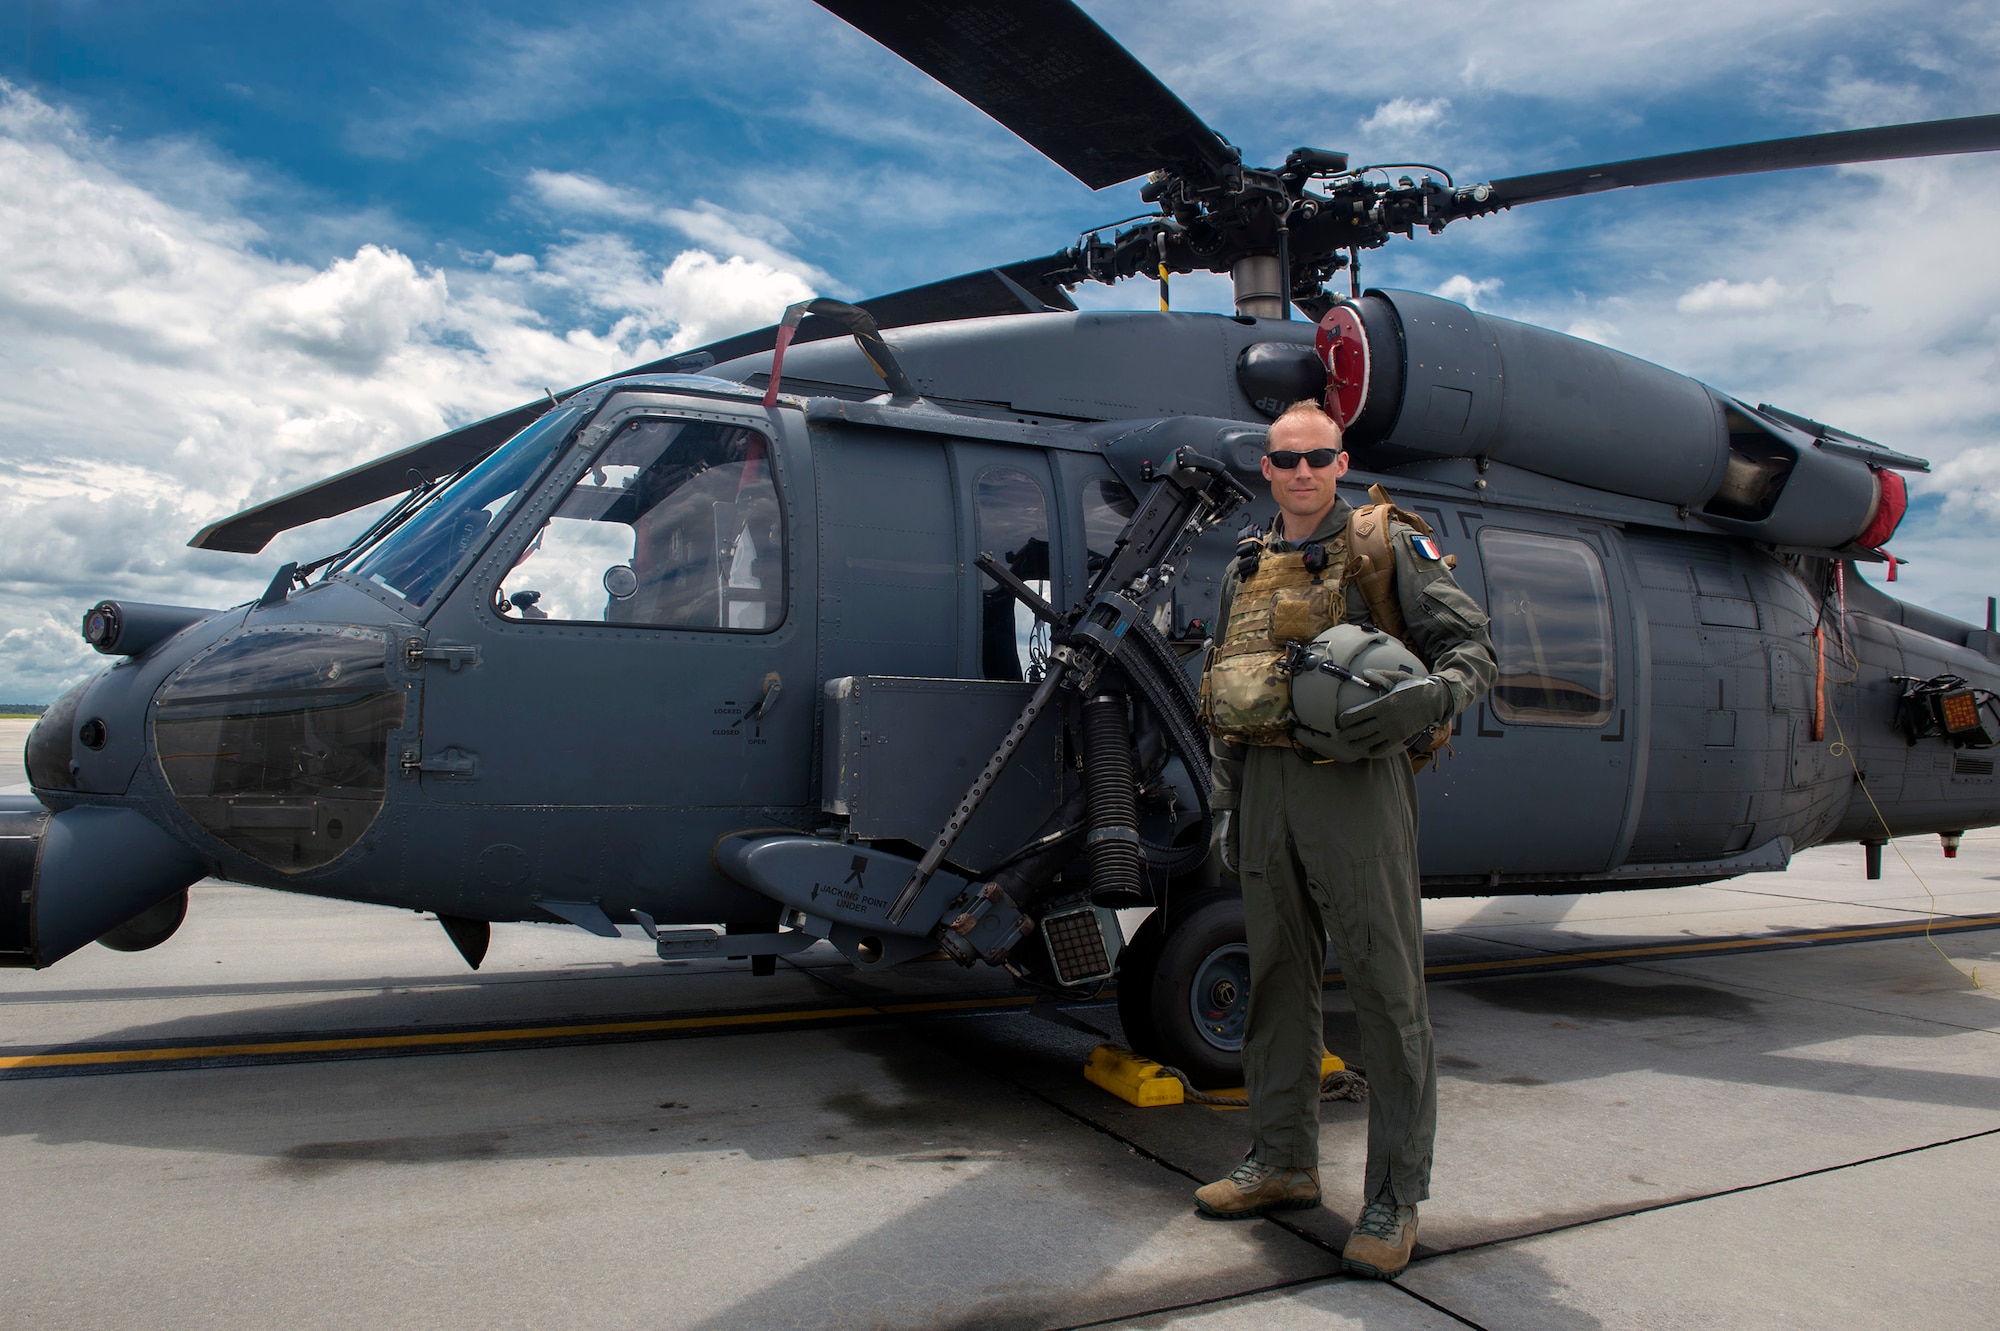 Commandant Micka, a French exchange pilot and assistant director of operations for Moody’s 41st Rescue Squadron, stands in front of an HH-60G Pavehawk, Aug. 2, 2017, at Moody Air Force Base, Ga. Prior to his arrival at the 41st RQS, Micka transitioned from flying the French Air Force’s EC-725 Caracal helicopter to learn the HH-60. Since childhood, Micka aspired to serve and fly for the French and U.S. military as a rescue pilot. (U.S. Air Force photo by Senior Airman Greg Nash)